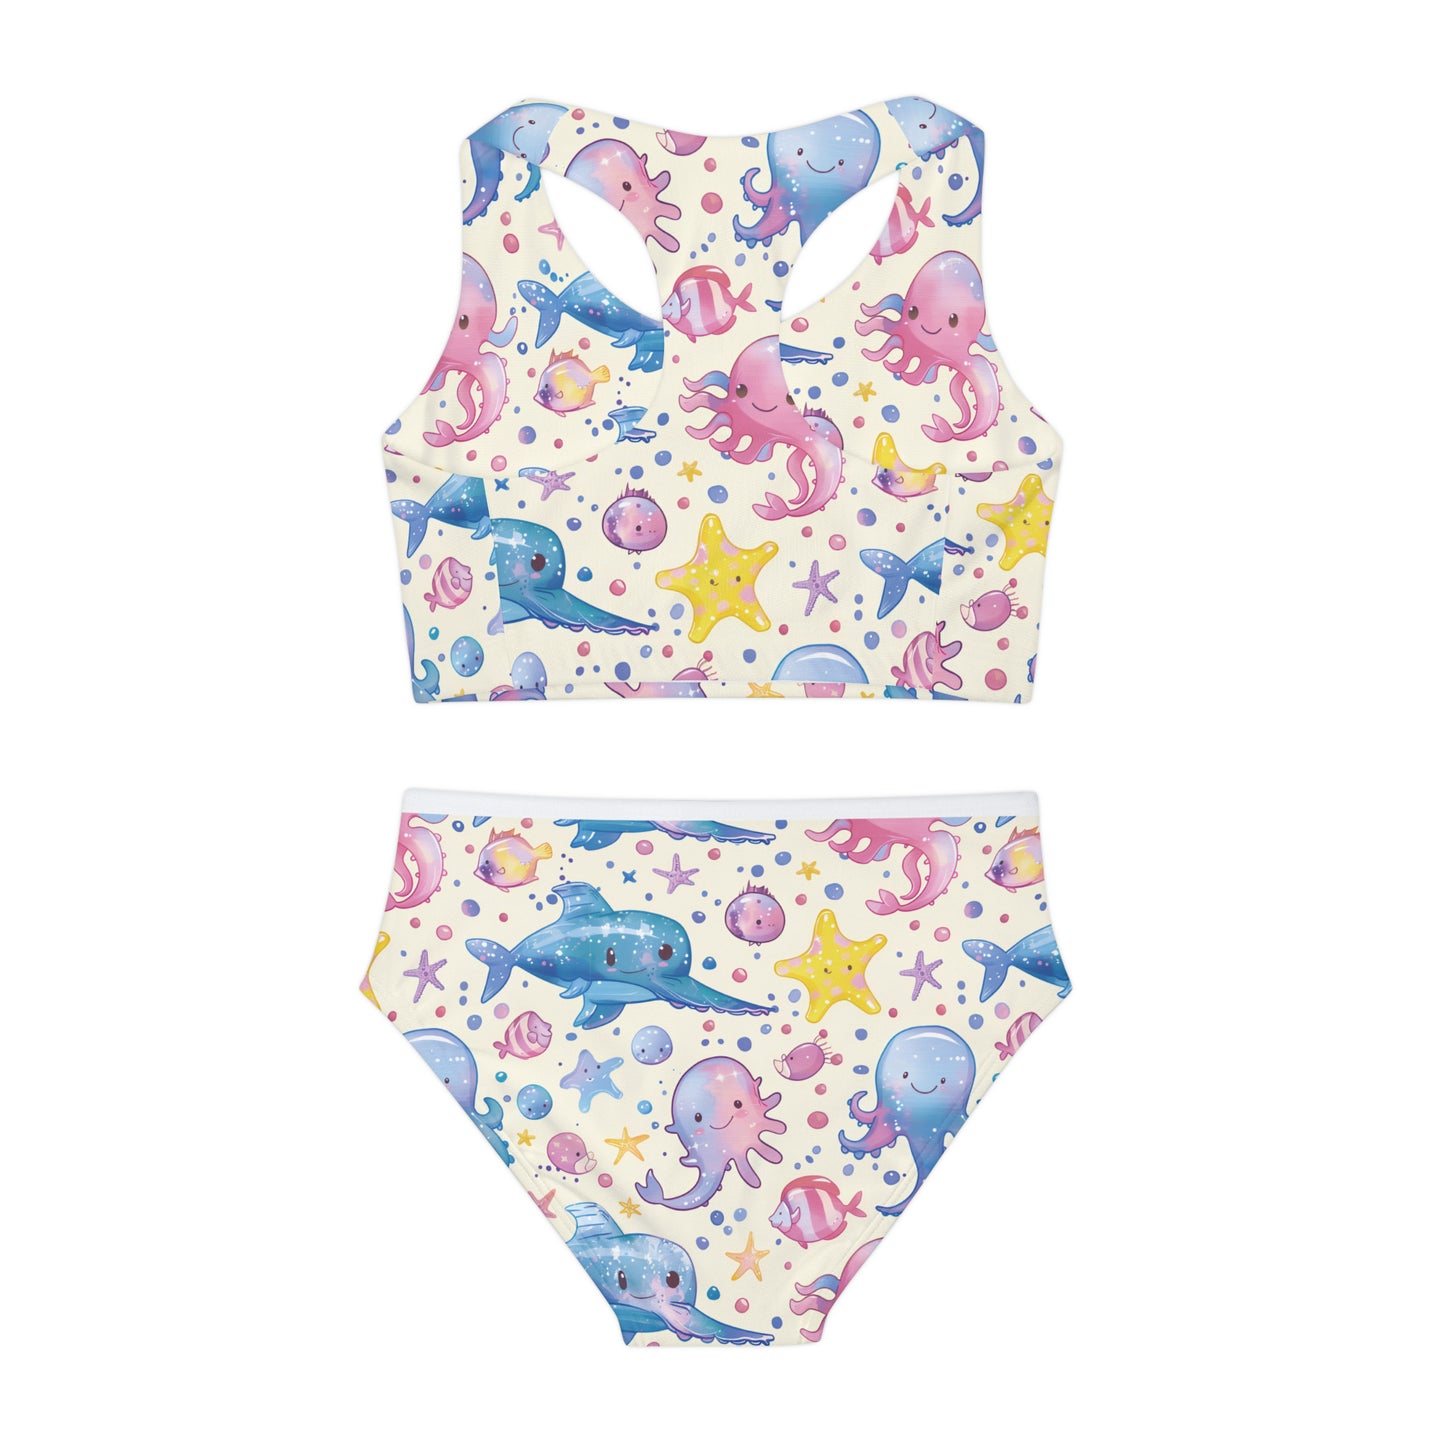 Adorable Sea Life Swimsuit: Playful Ocean Style for Little Adventurers